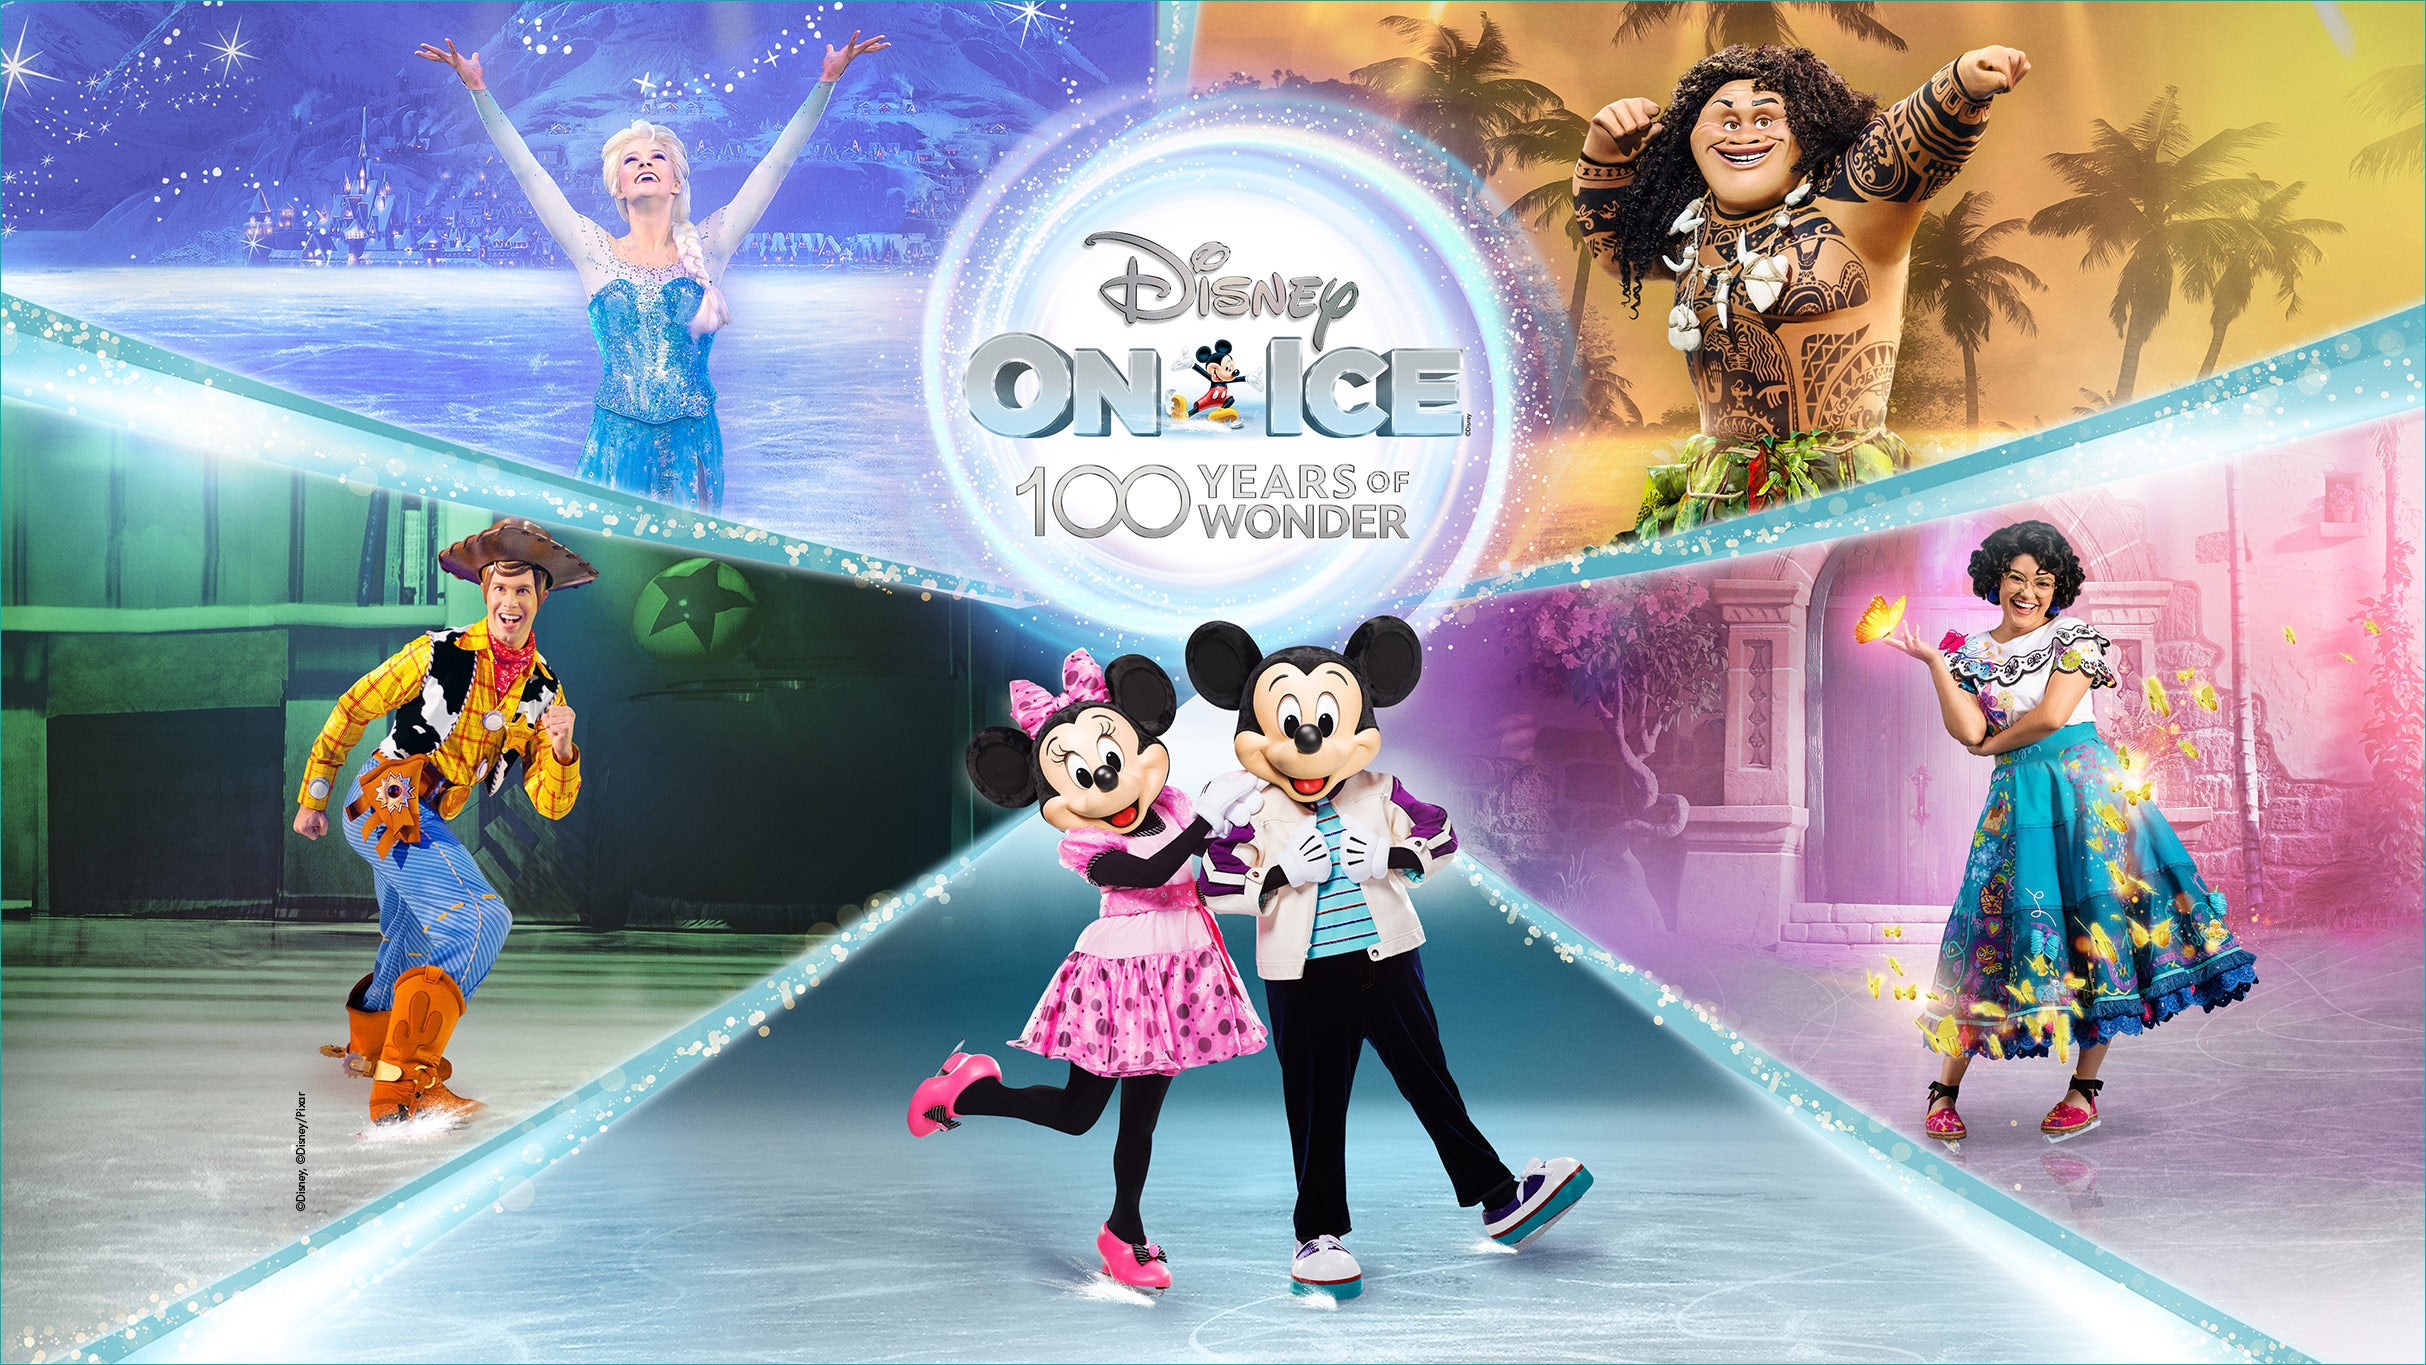 Disney On Ice presents 100 Years of Wonder Event Title Pic